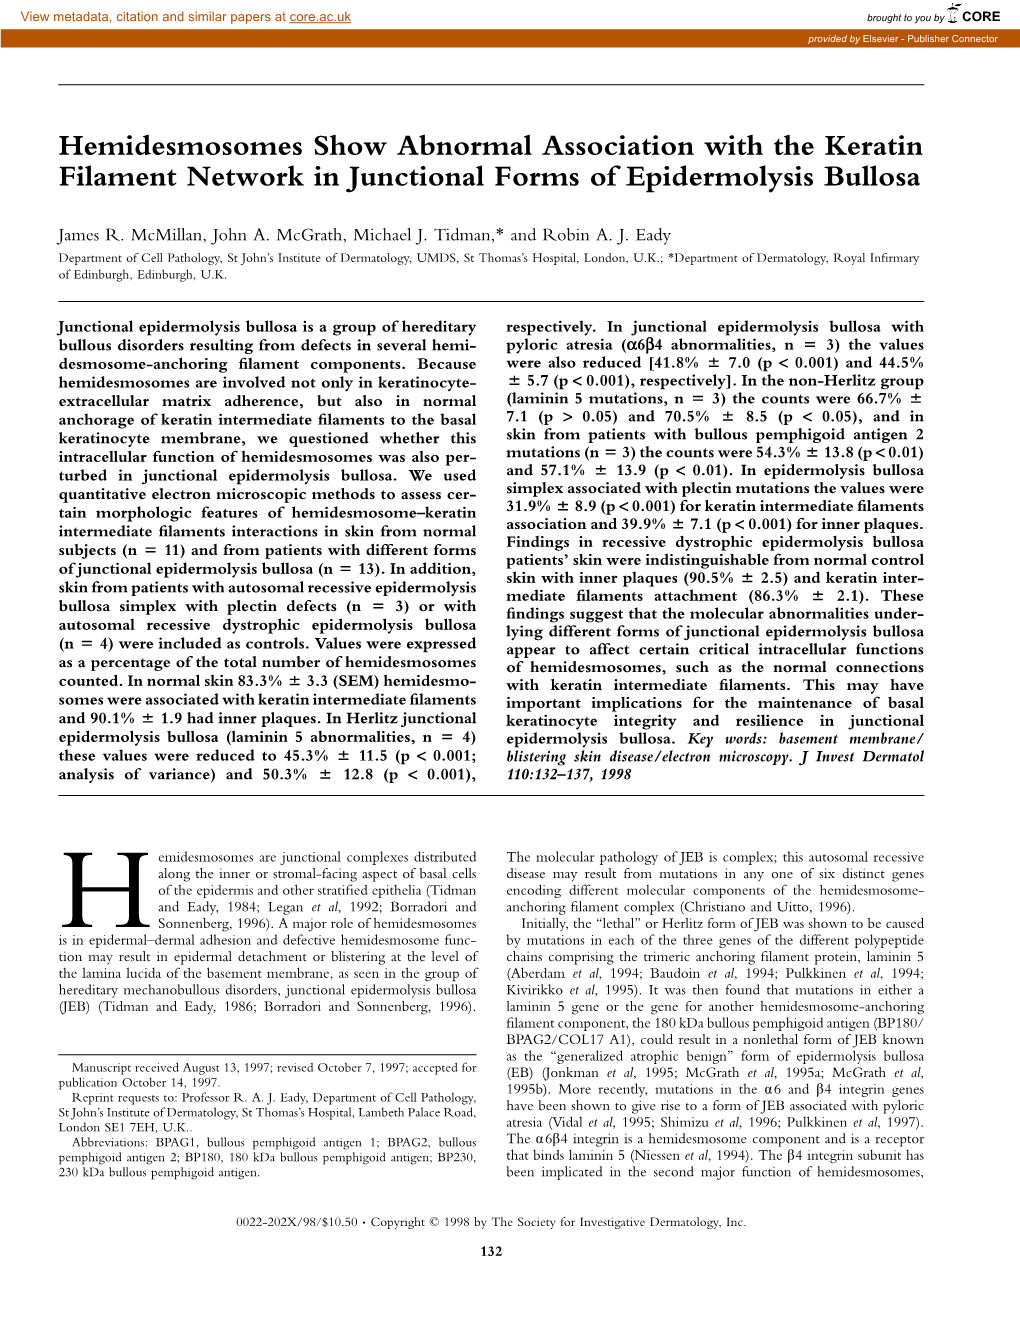 Hemidesmosomes Show Abnormal Association with the Keratin Filament Network in Junctional Forms of Epidermolysis Bullosa